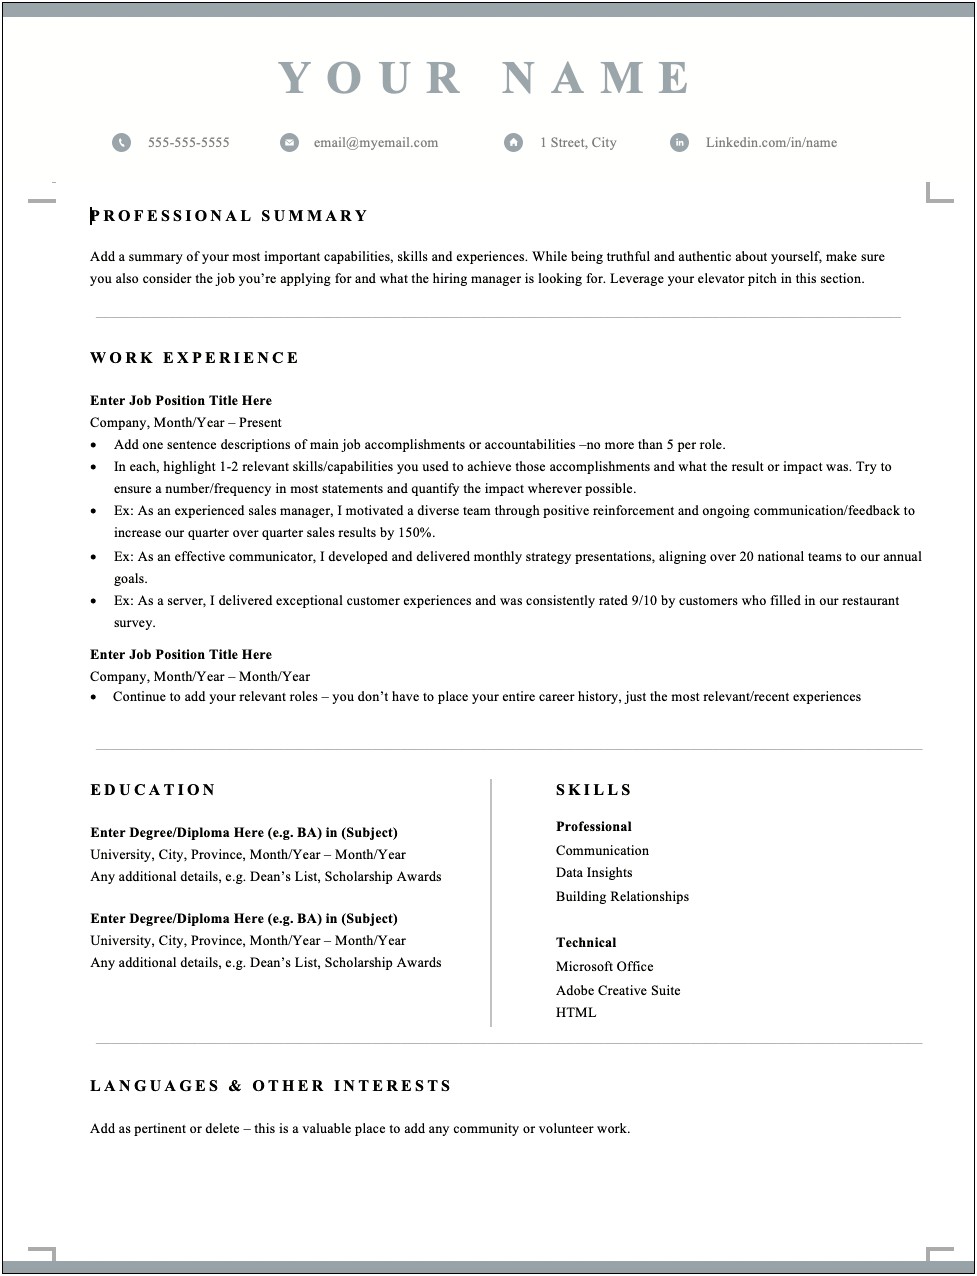 Resume Professional And Volunteer Experience In Same Section